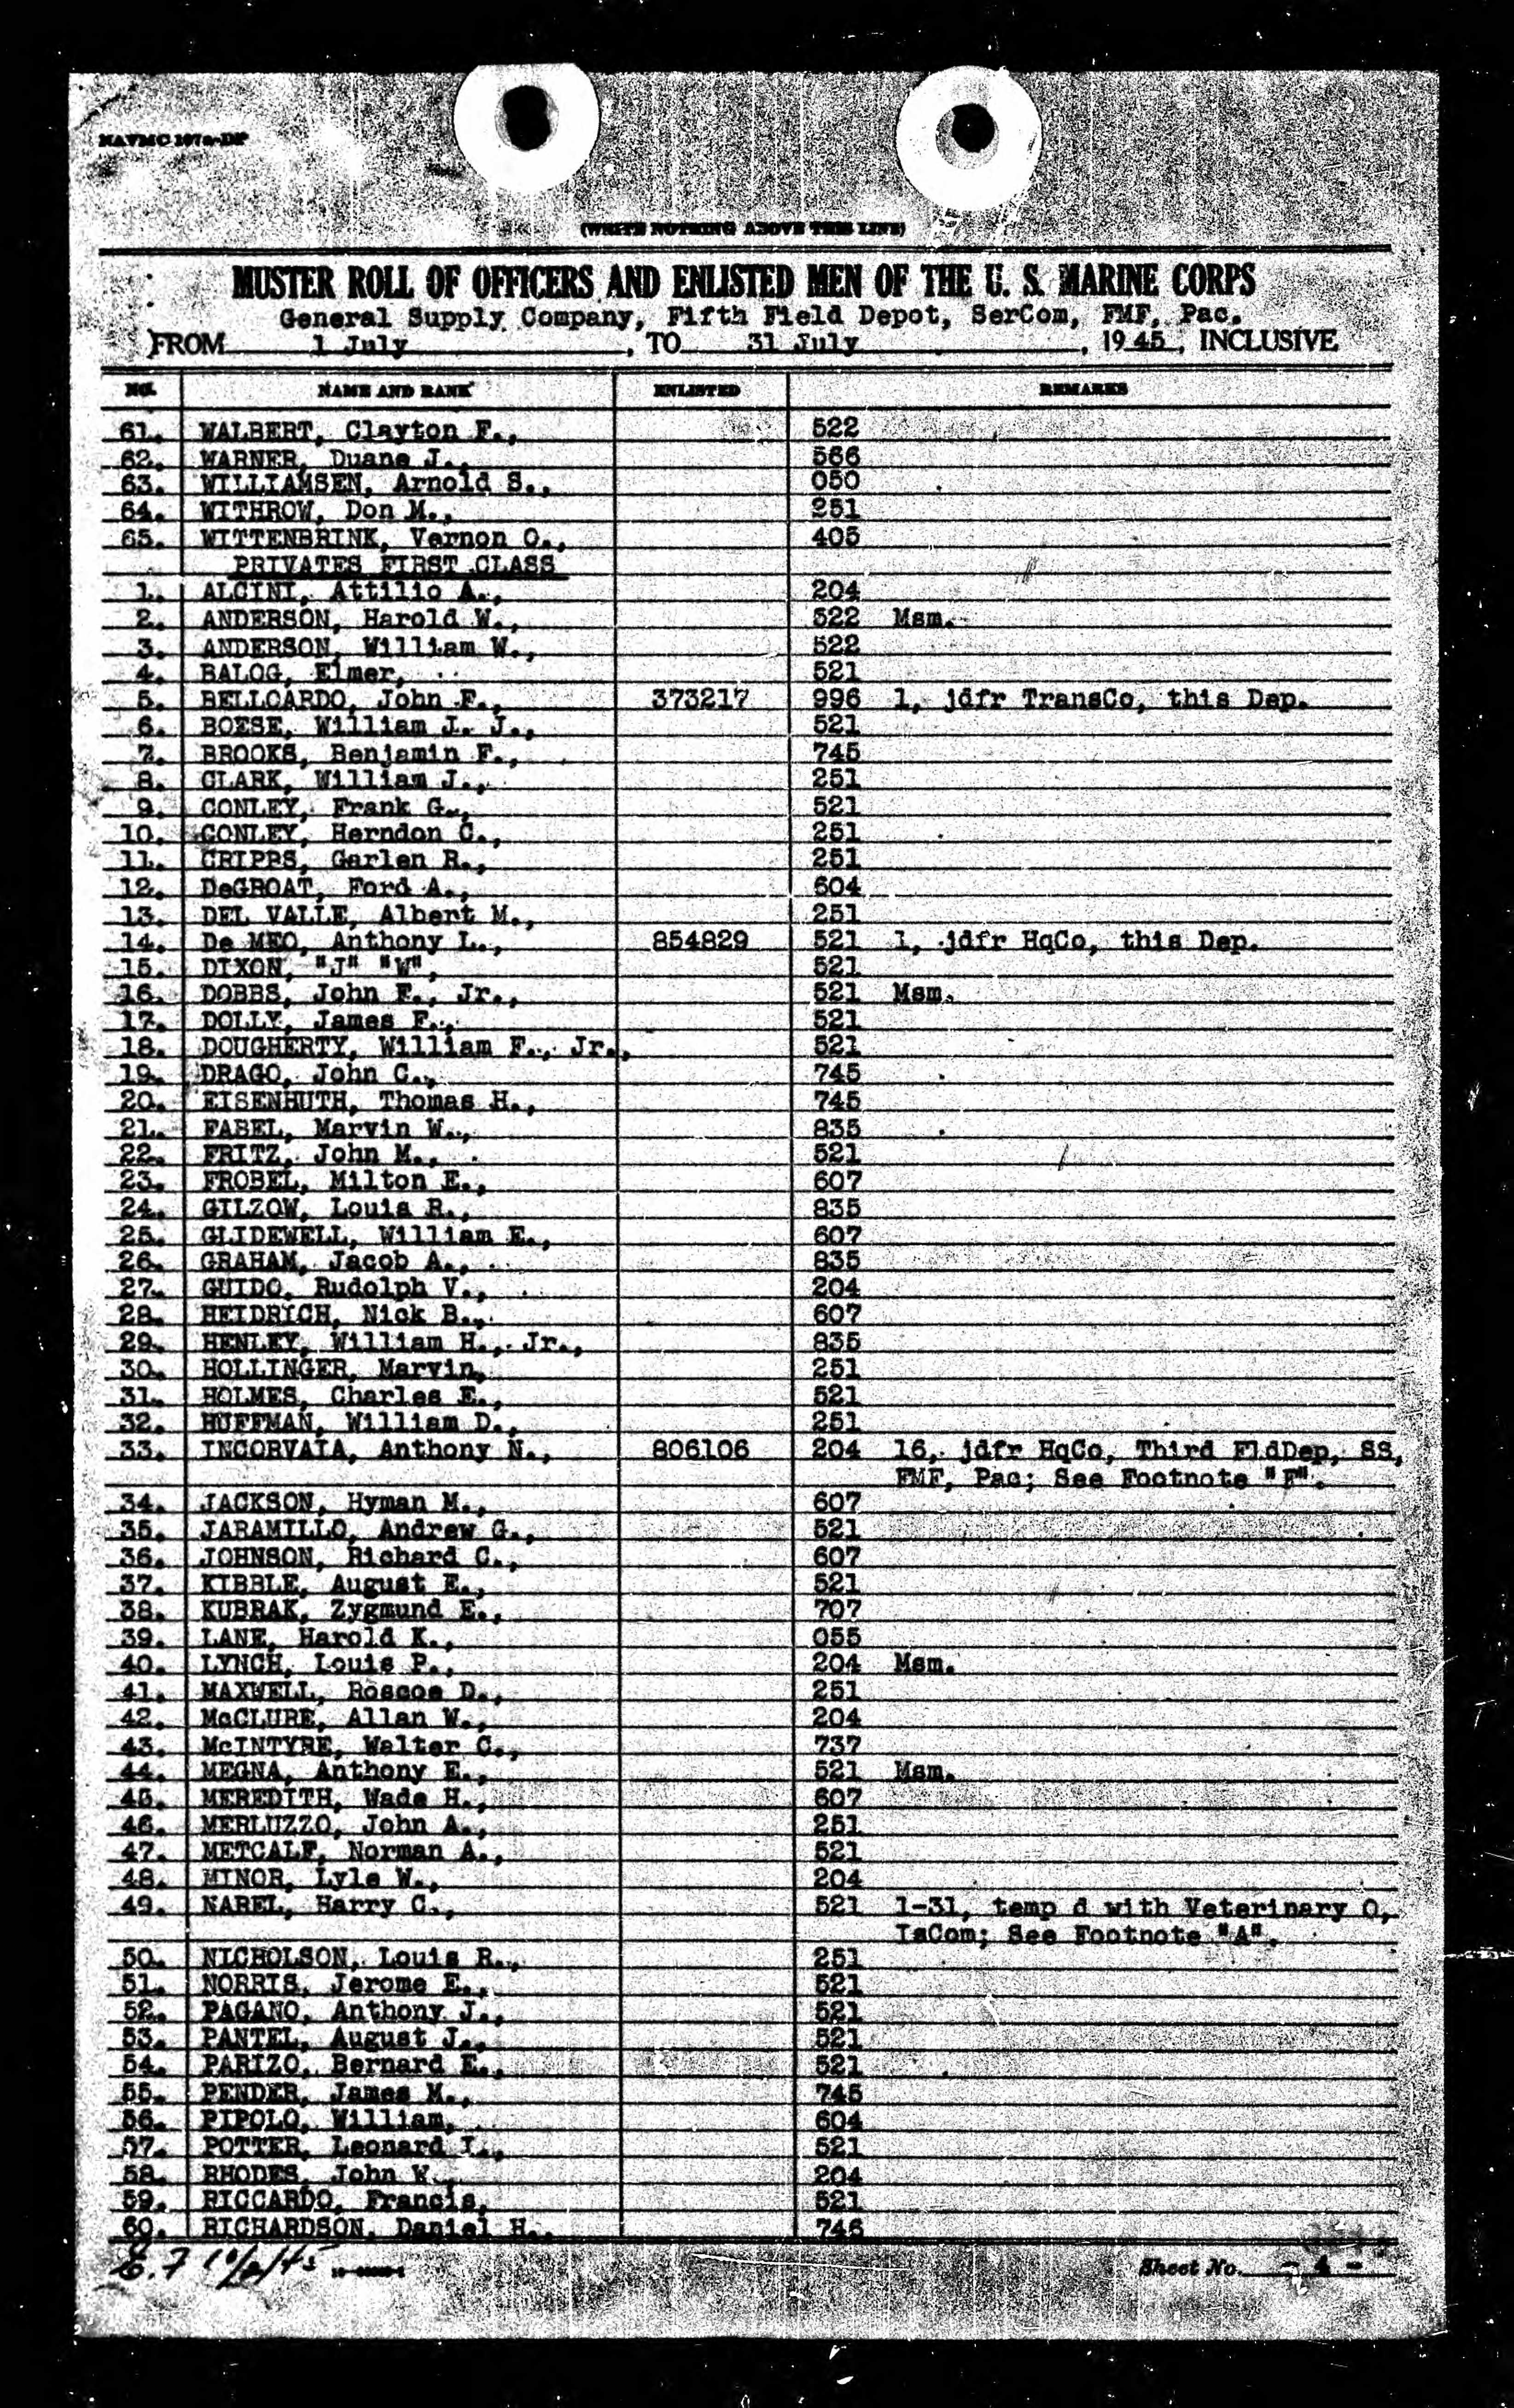 Marine Muster Roll, General Supply Company, July 1945